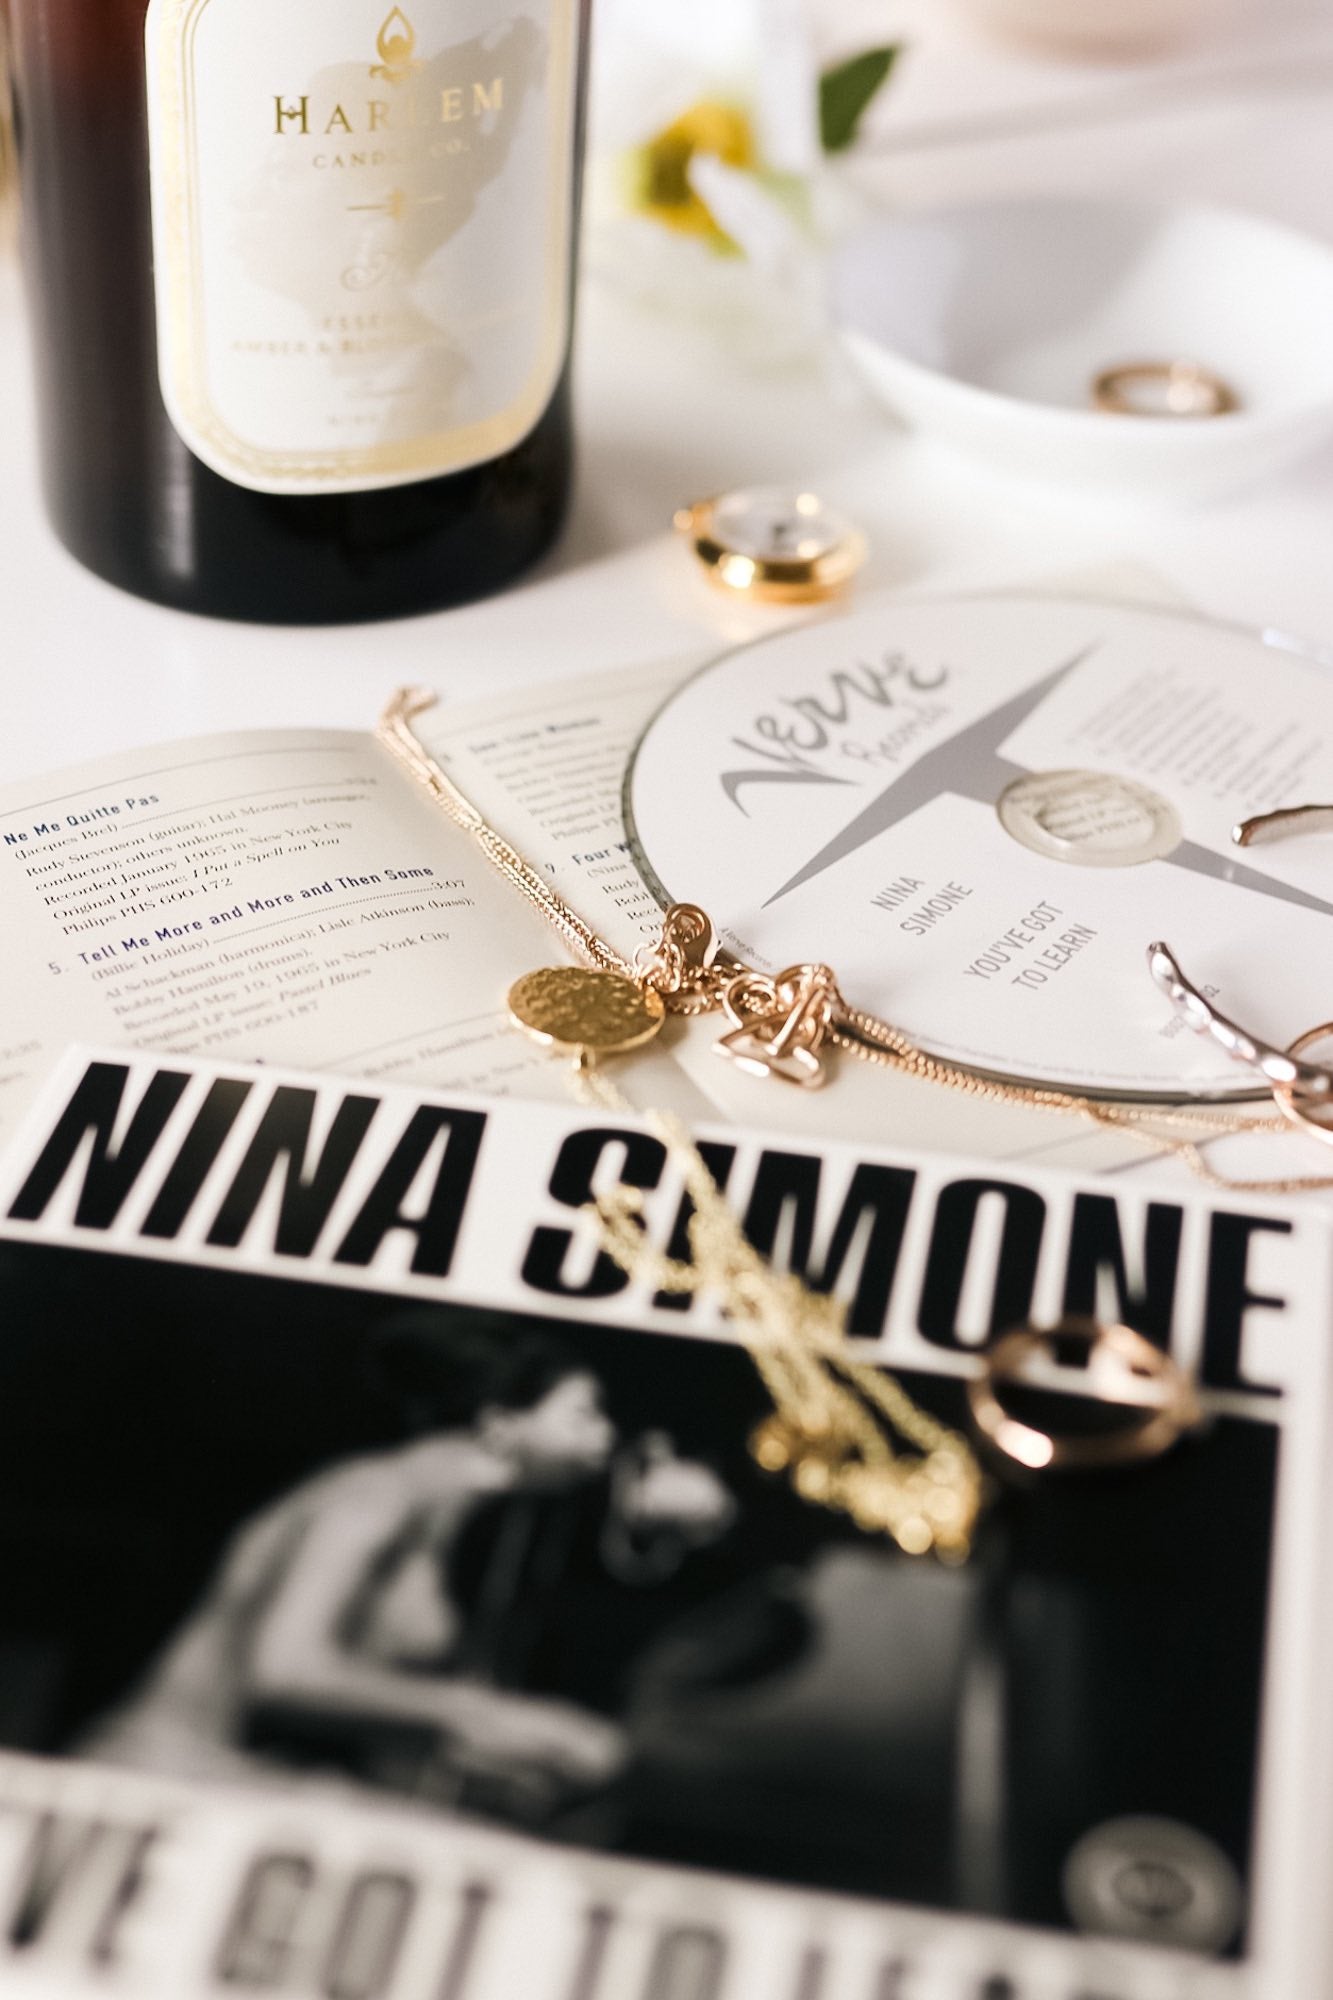 This is a lifestyle image of the Nina candle picture next to a Nina Simone, CD and some jewelry. The candle is illuminated with a CD  and album cover in the image